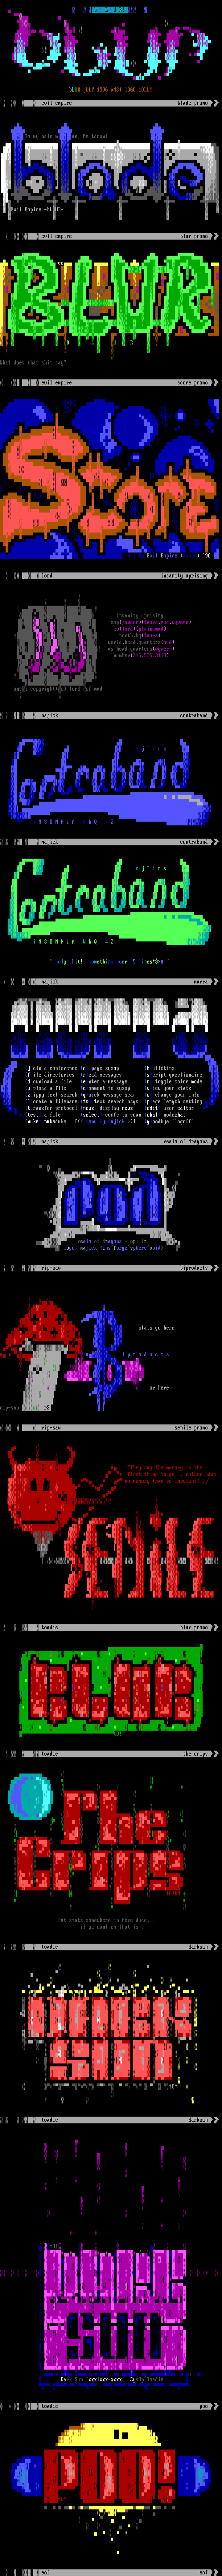 blur july 1996 ansi logo colly by Multiple Artists